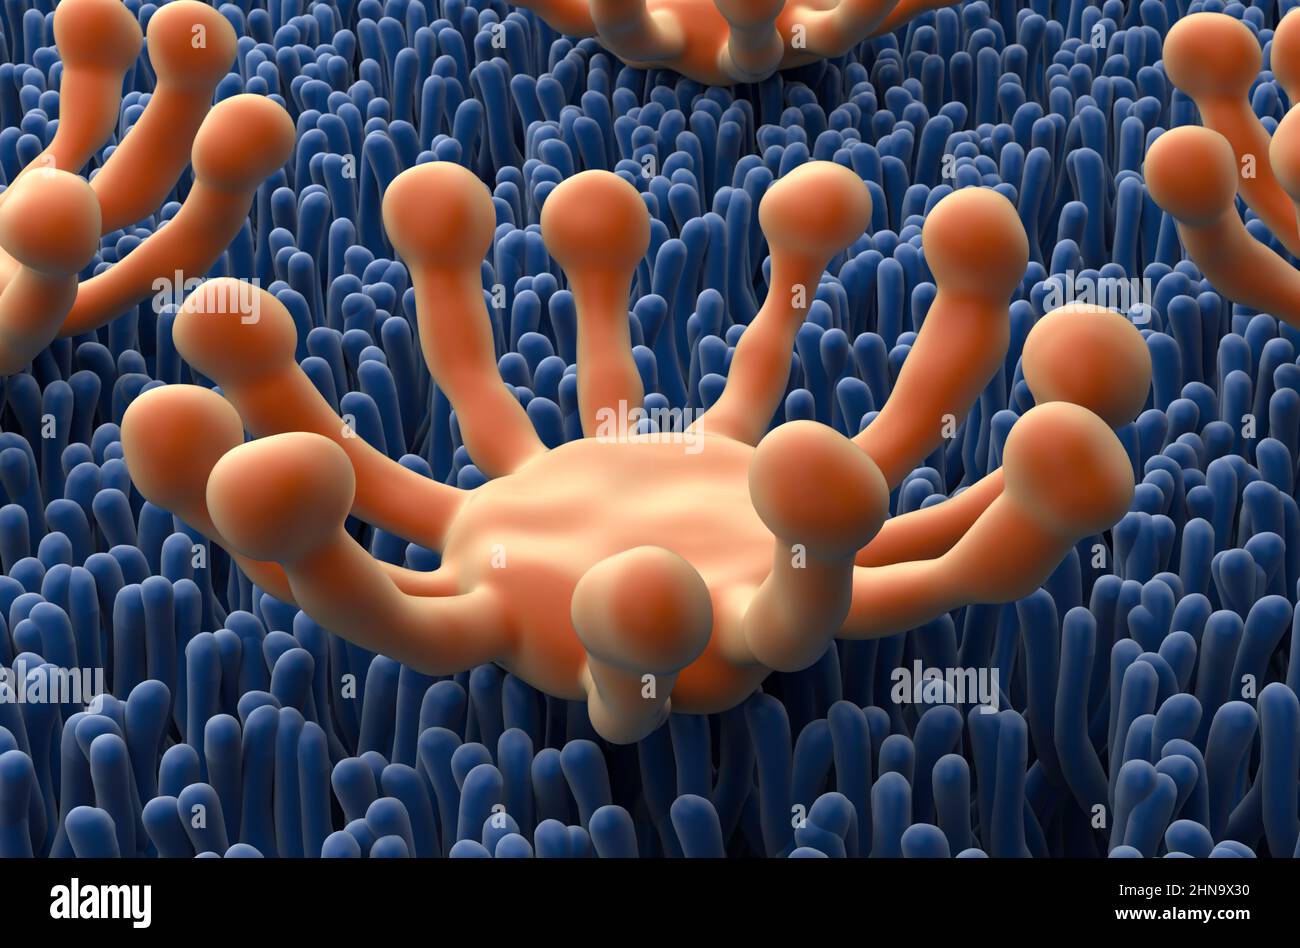 Smell (olfactory) receptor field in nasal lining - closeup view 3d illustration Stock Photo